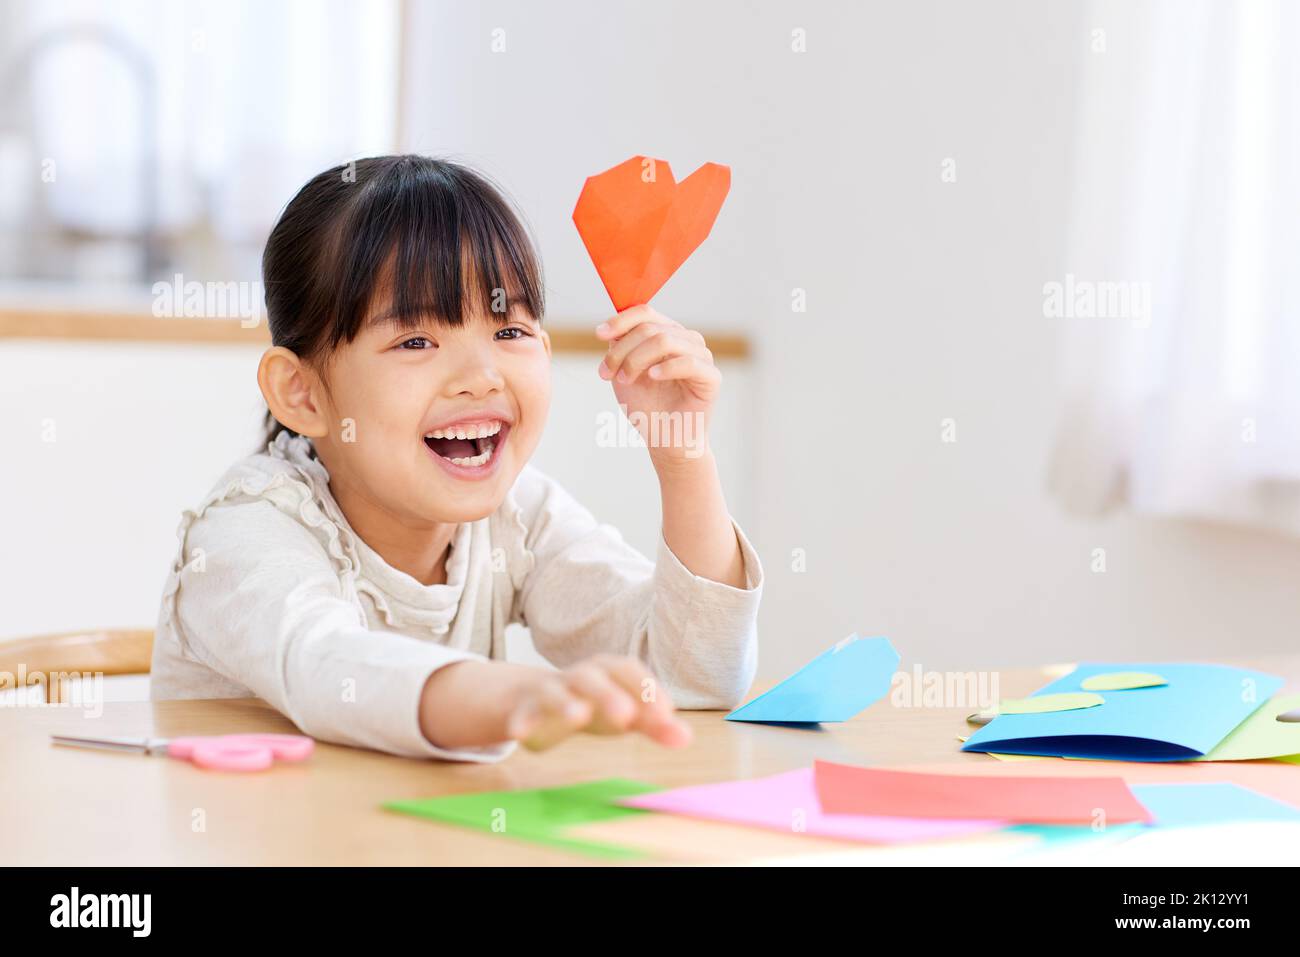 Japanese kid playing with origami at home Stock Photo